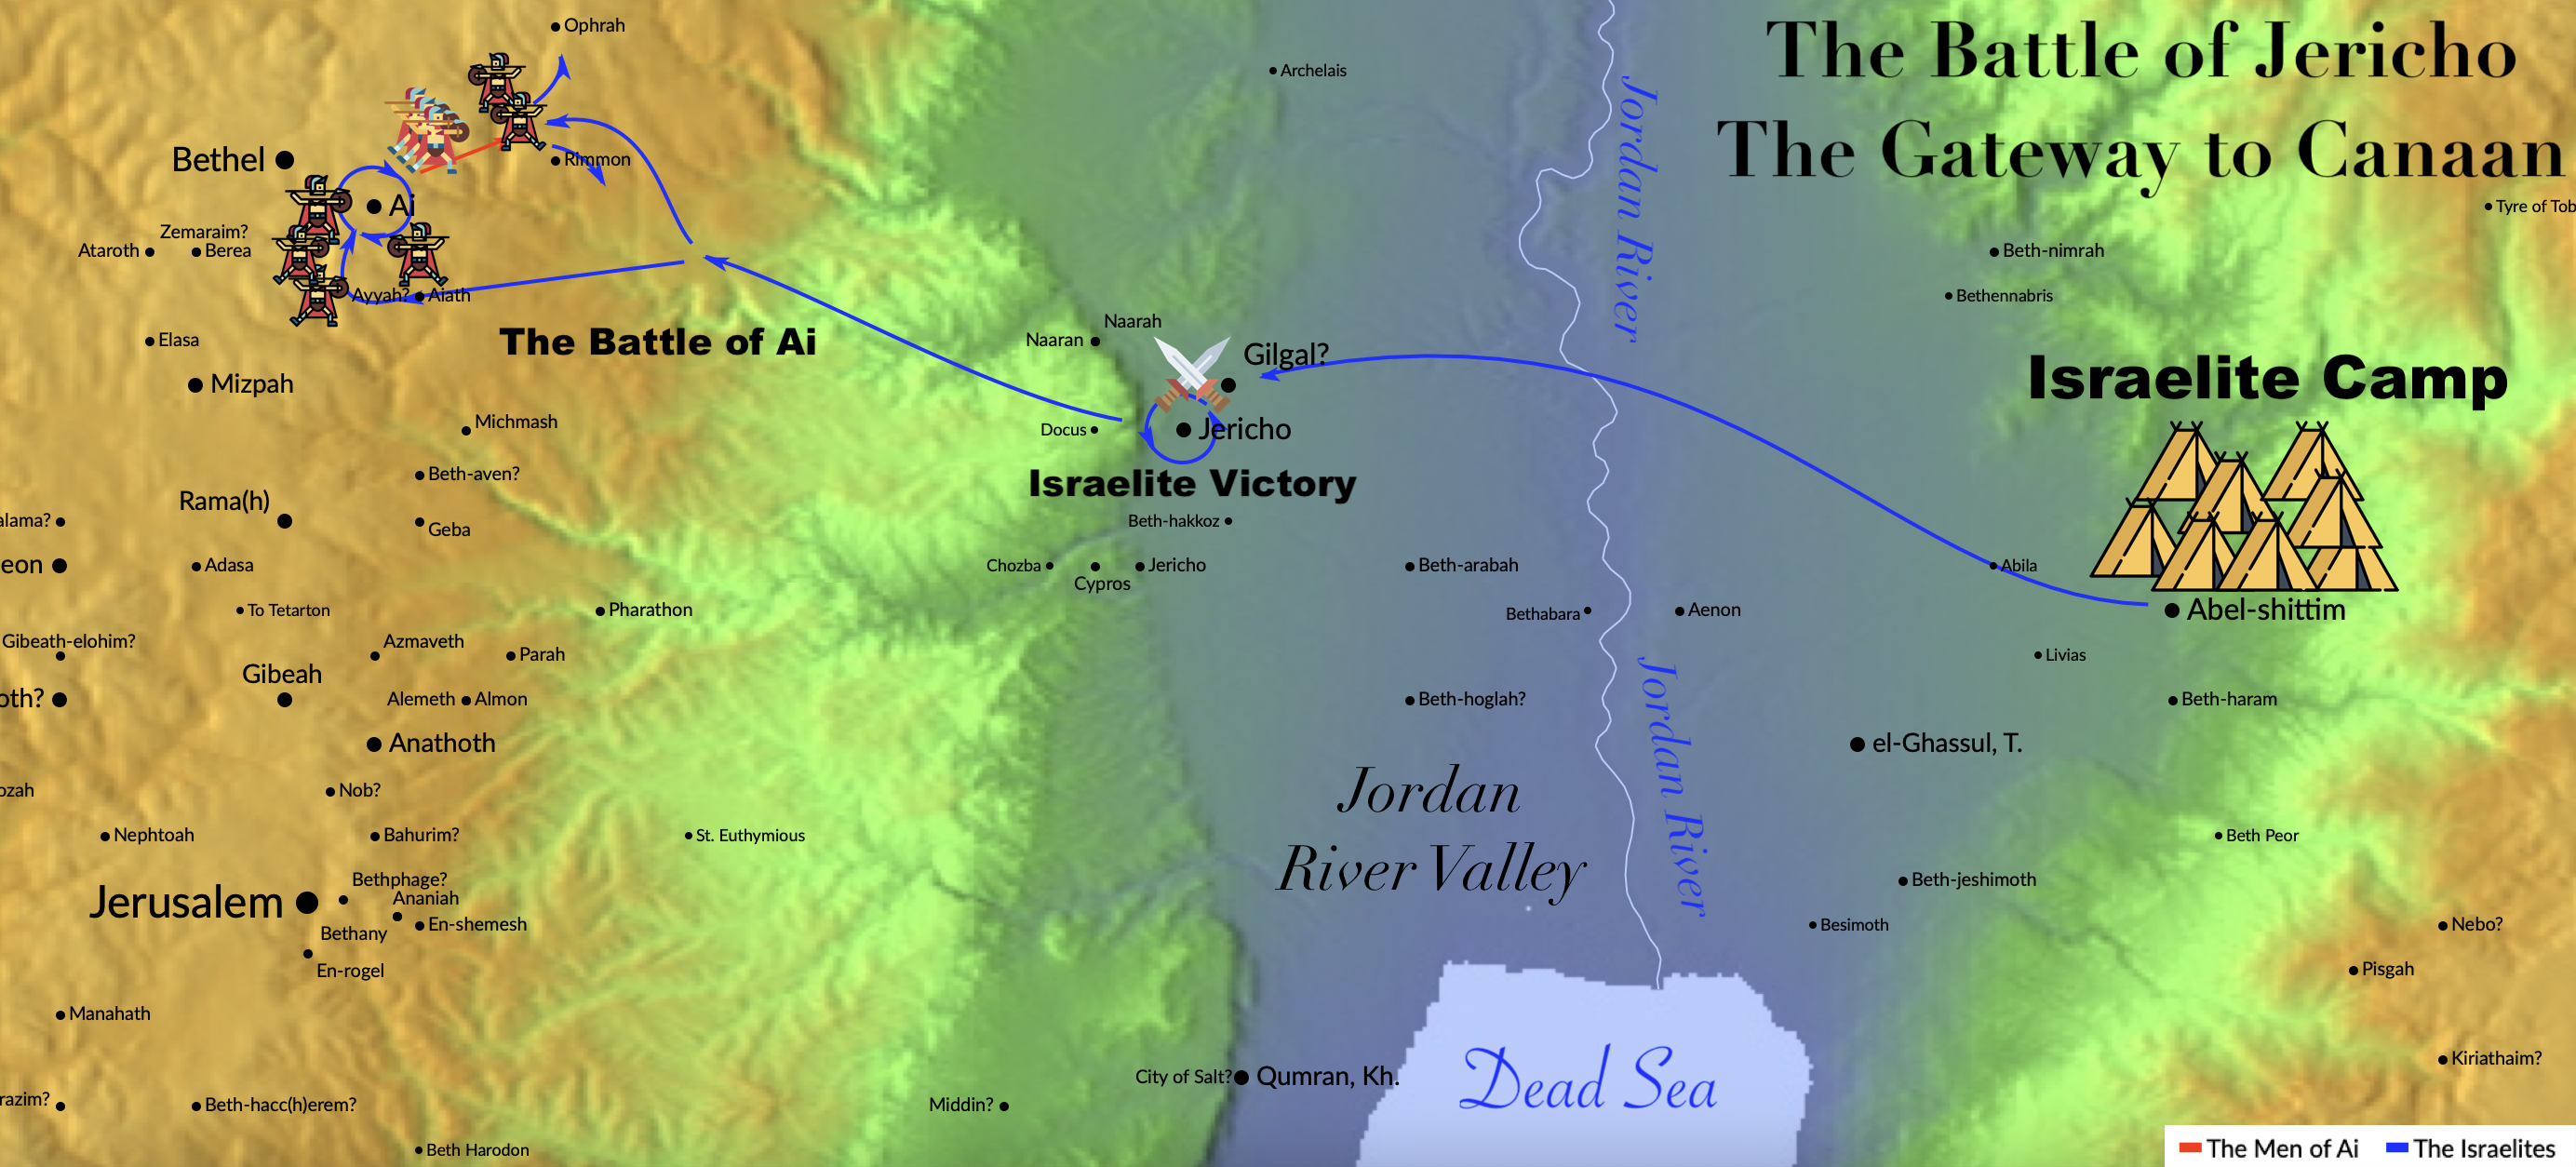 Battle map of Jericho and the subsequent Battle of Bethel & Ai.